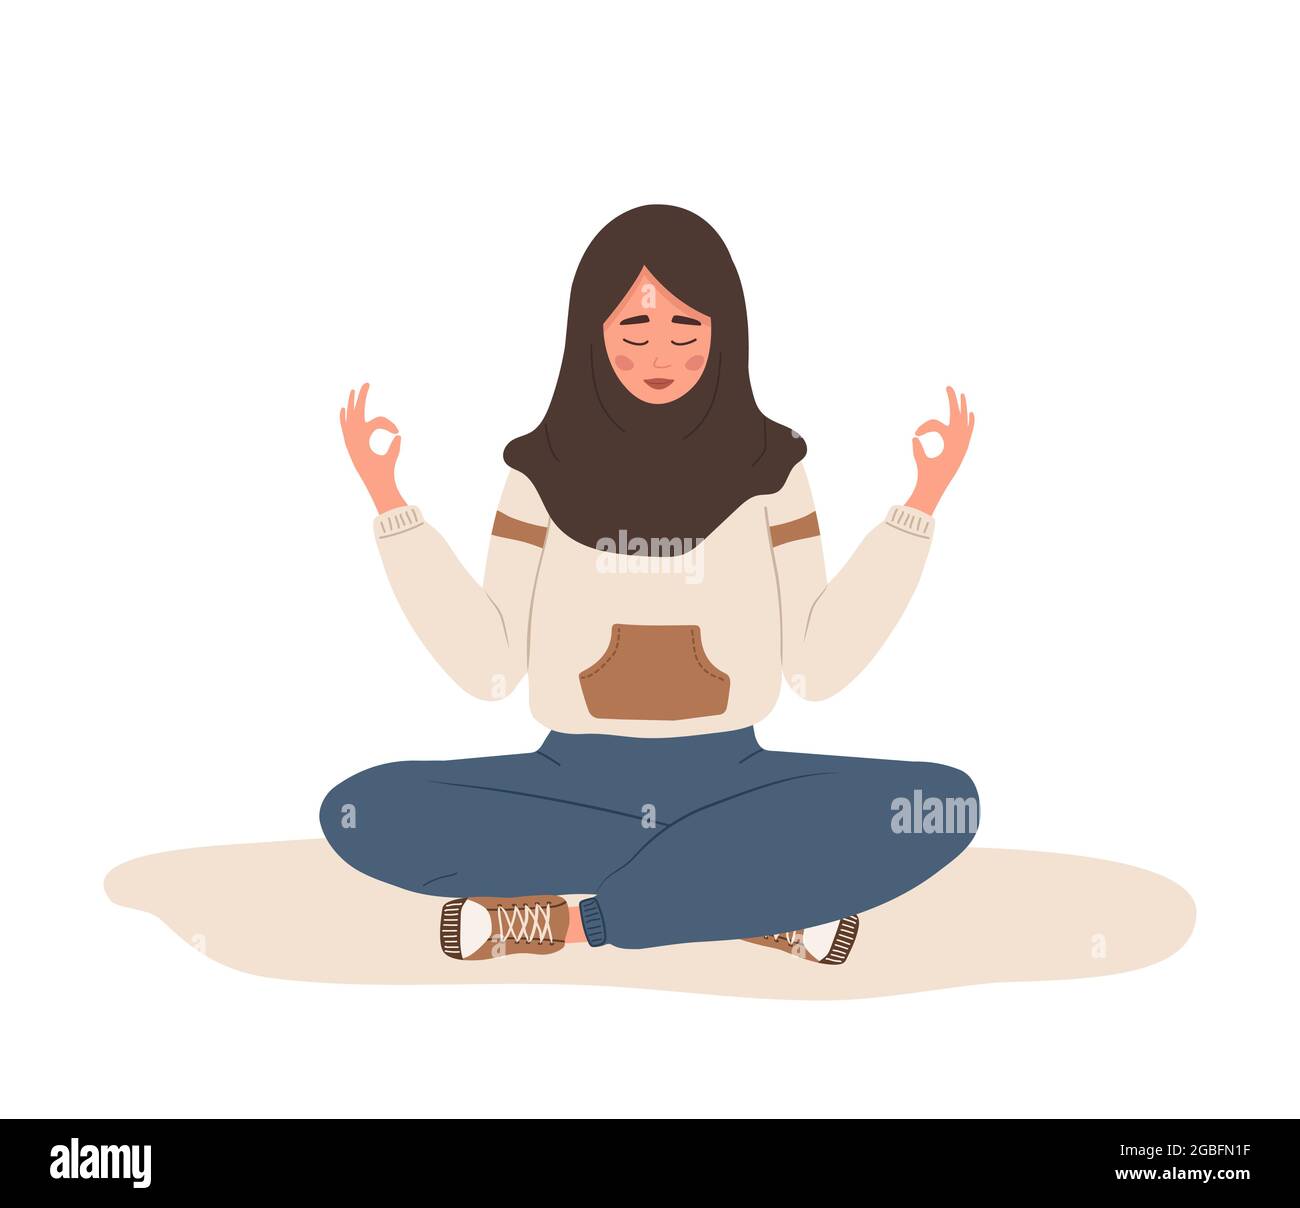 Breath awareness yoga exercise. Arab woman practicing belly breathing for relaxation. Meditation for body, mind and emotions. Spiritual practice Stock Vector